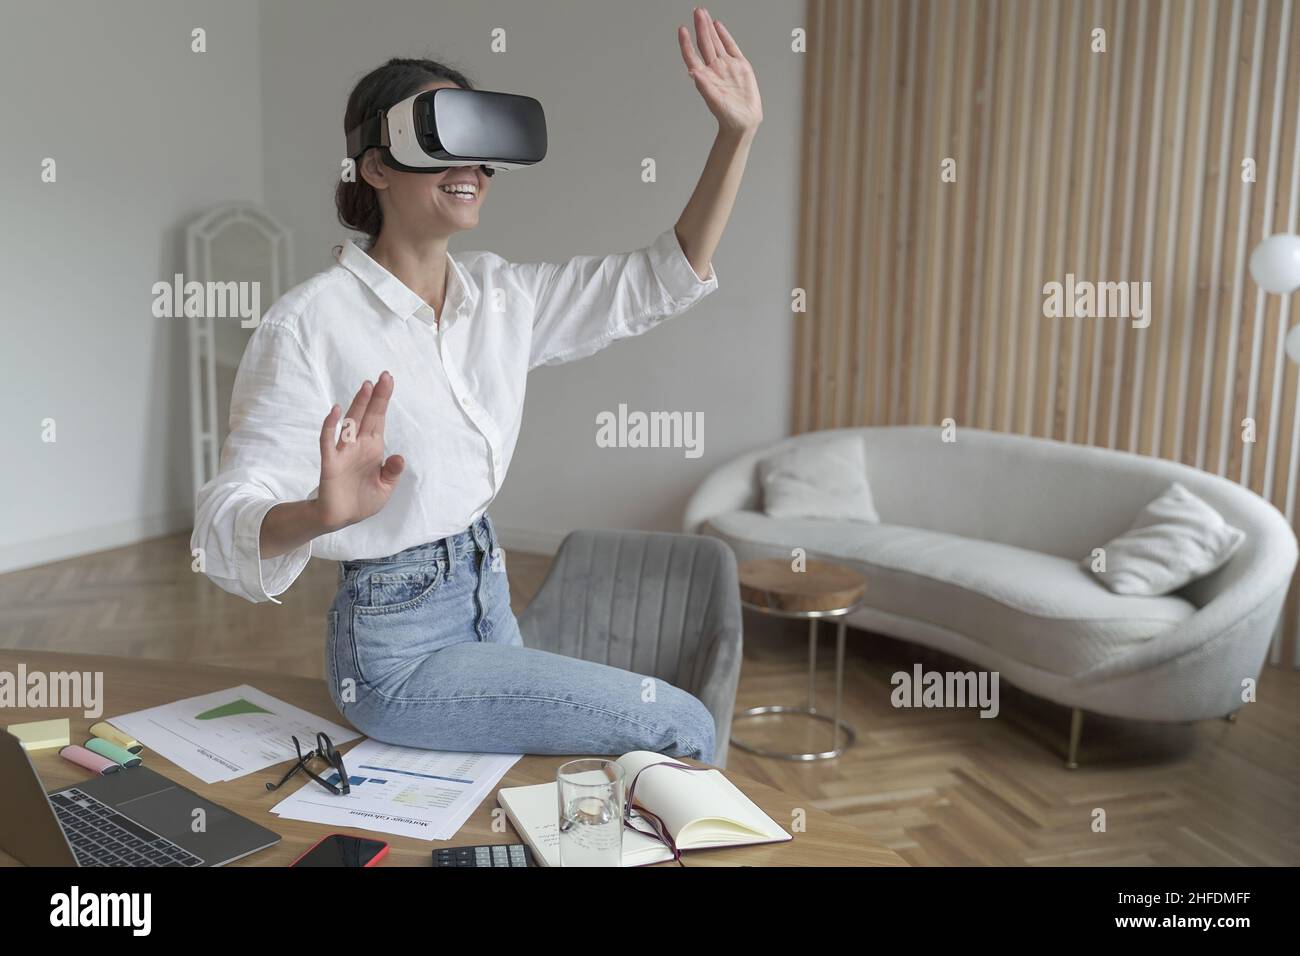 Businesswoman in VR headset on head touching 3d objects while working in modern office Stock Photo